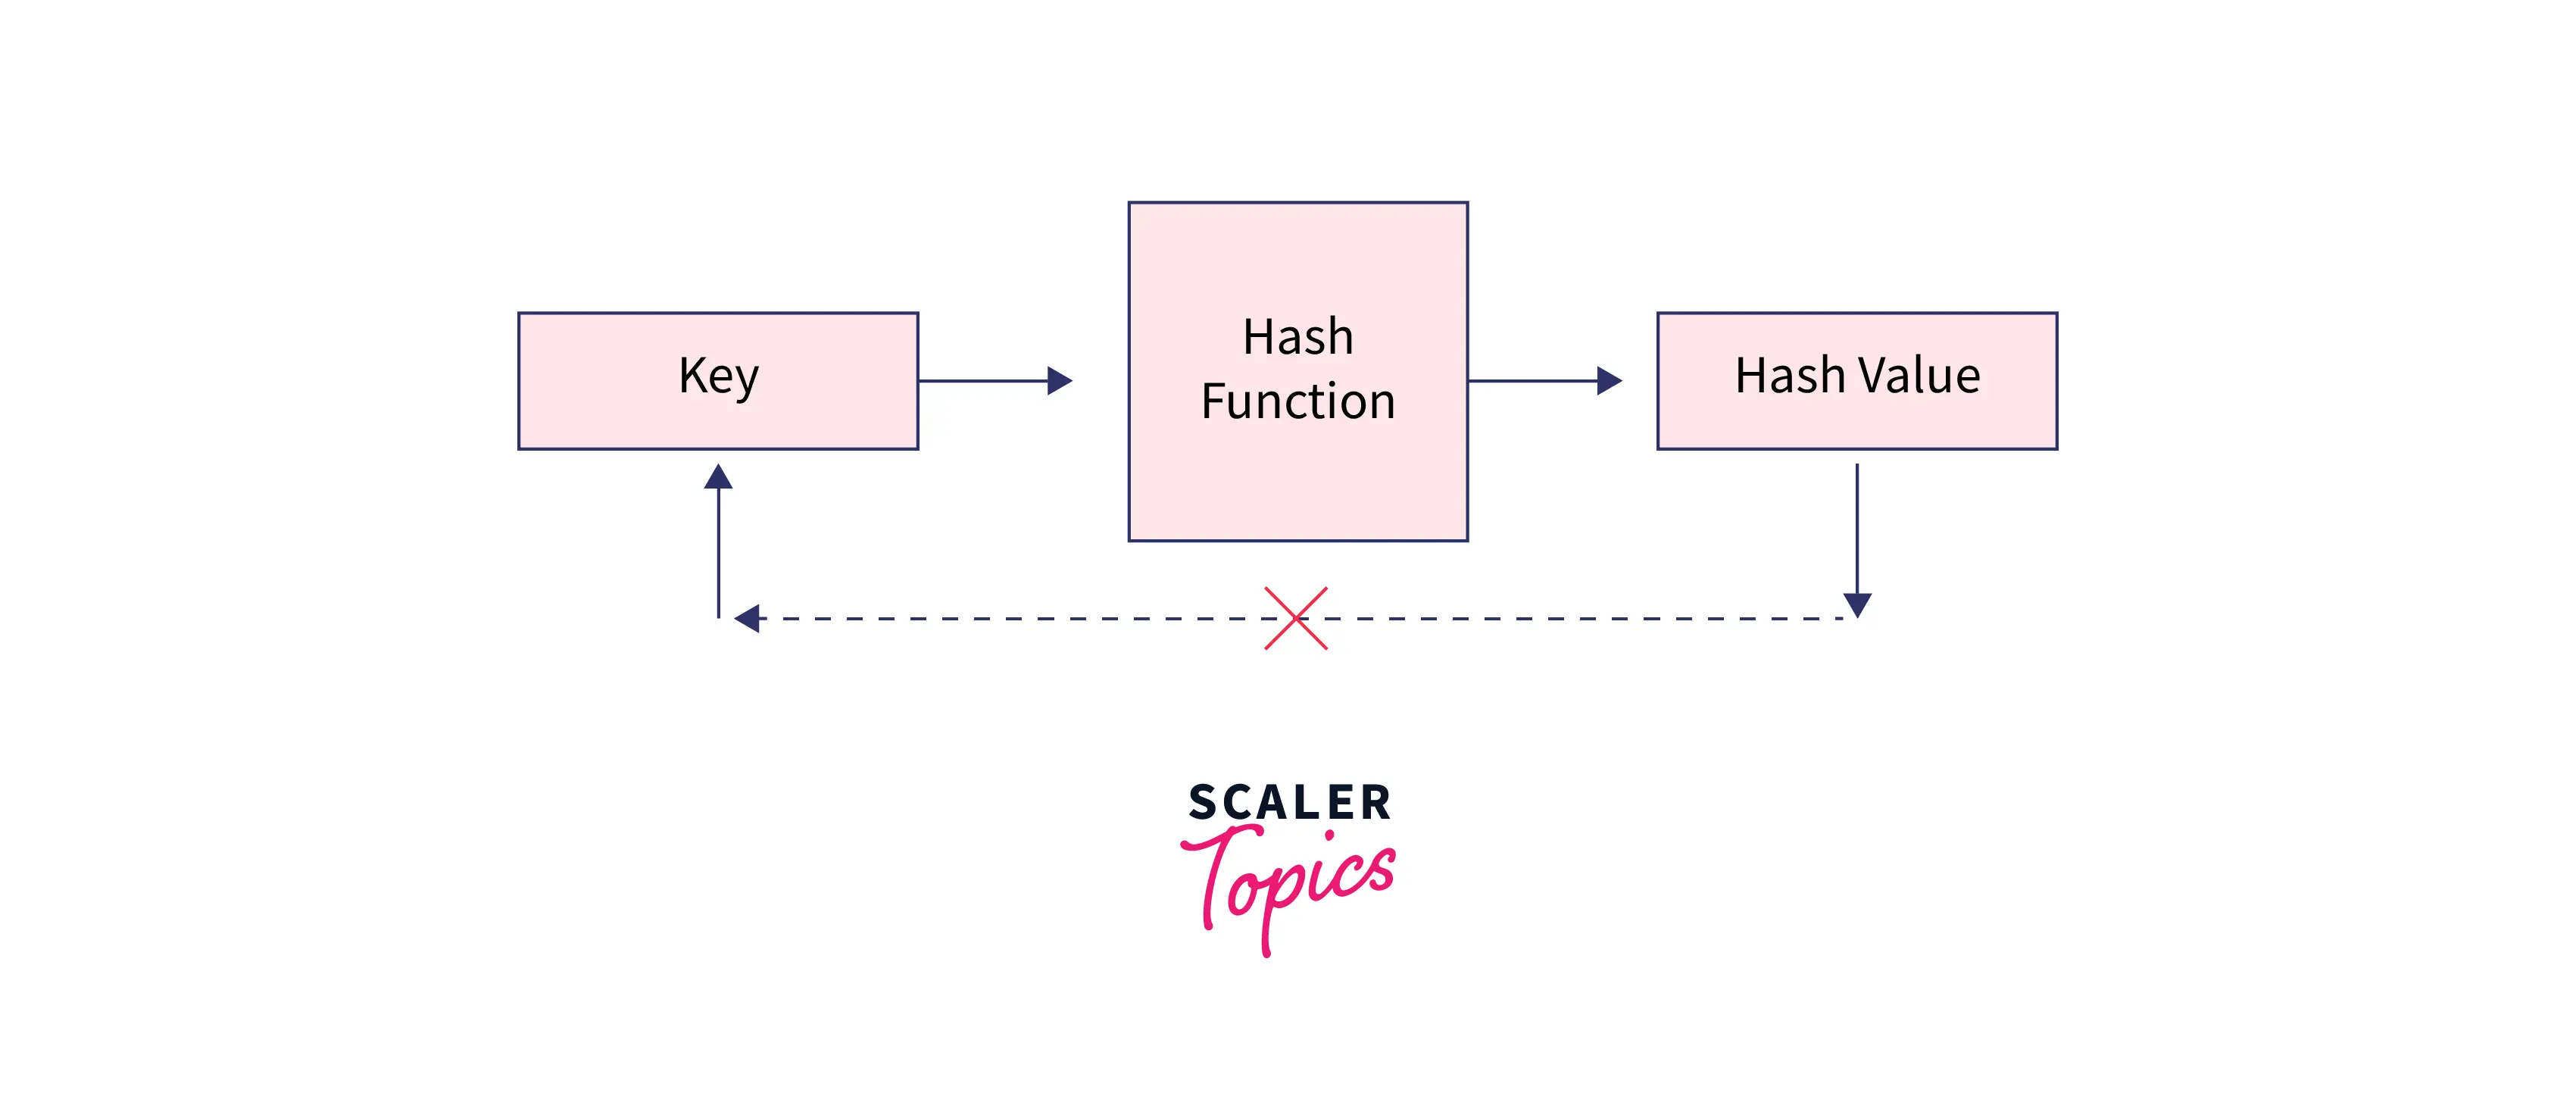 Characteristic of a Hashing Algorithm One